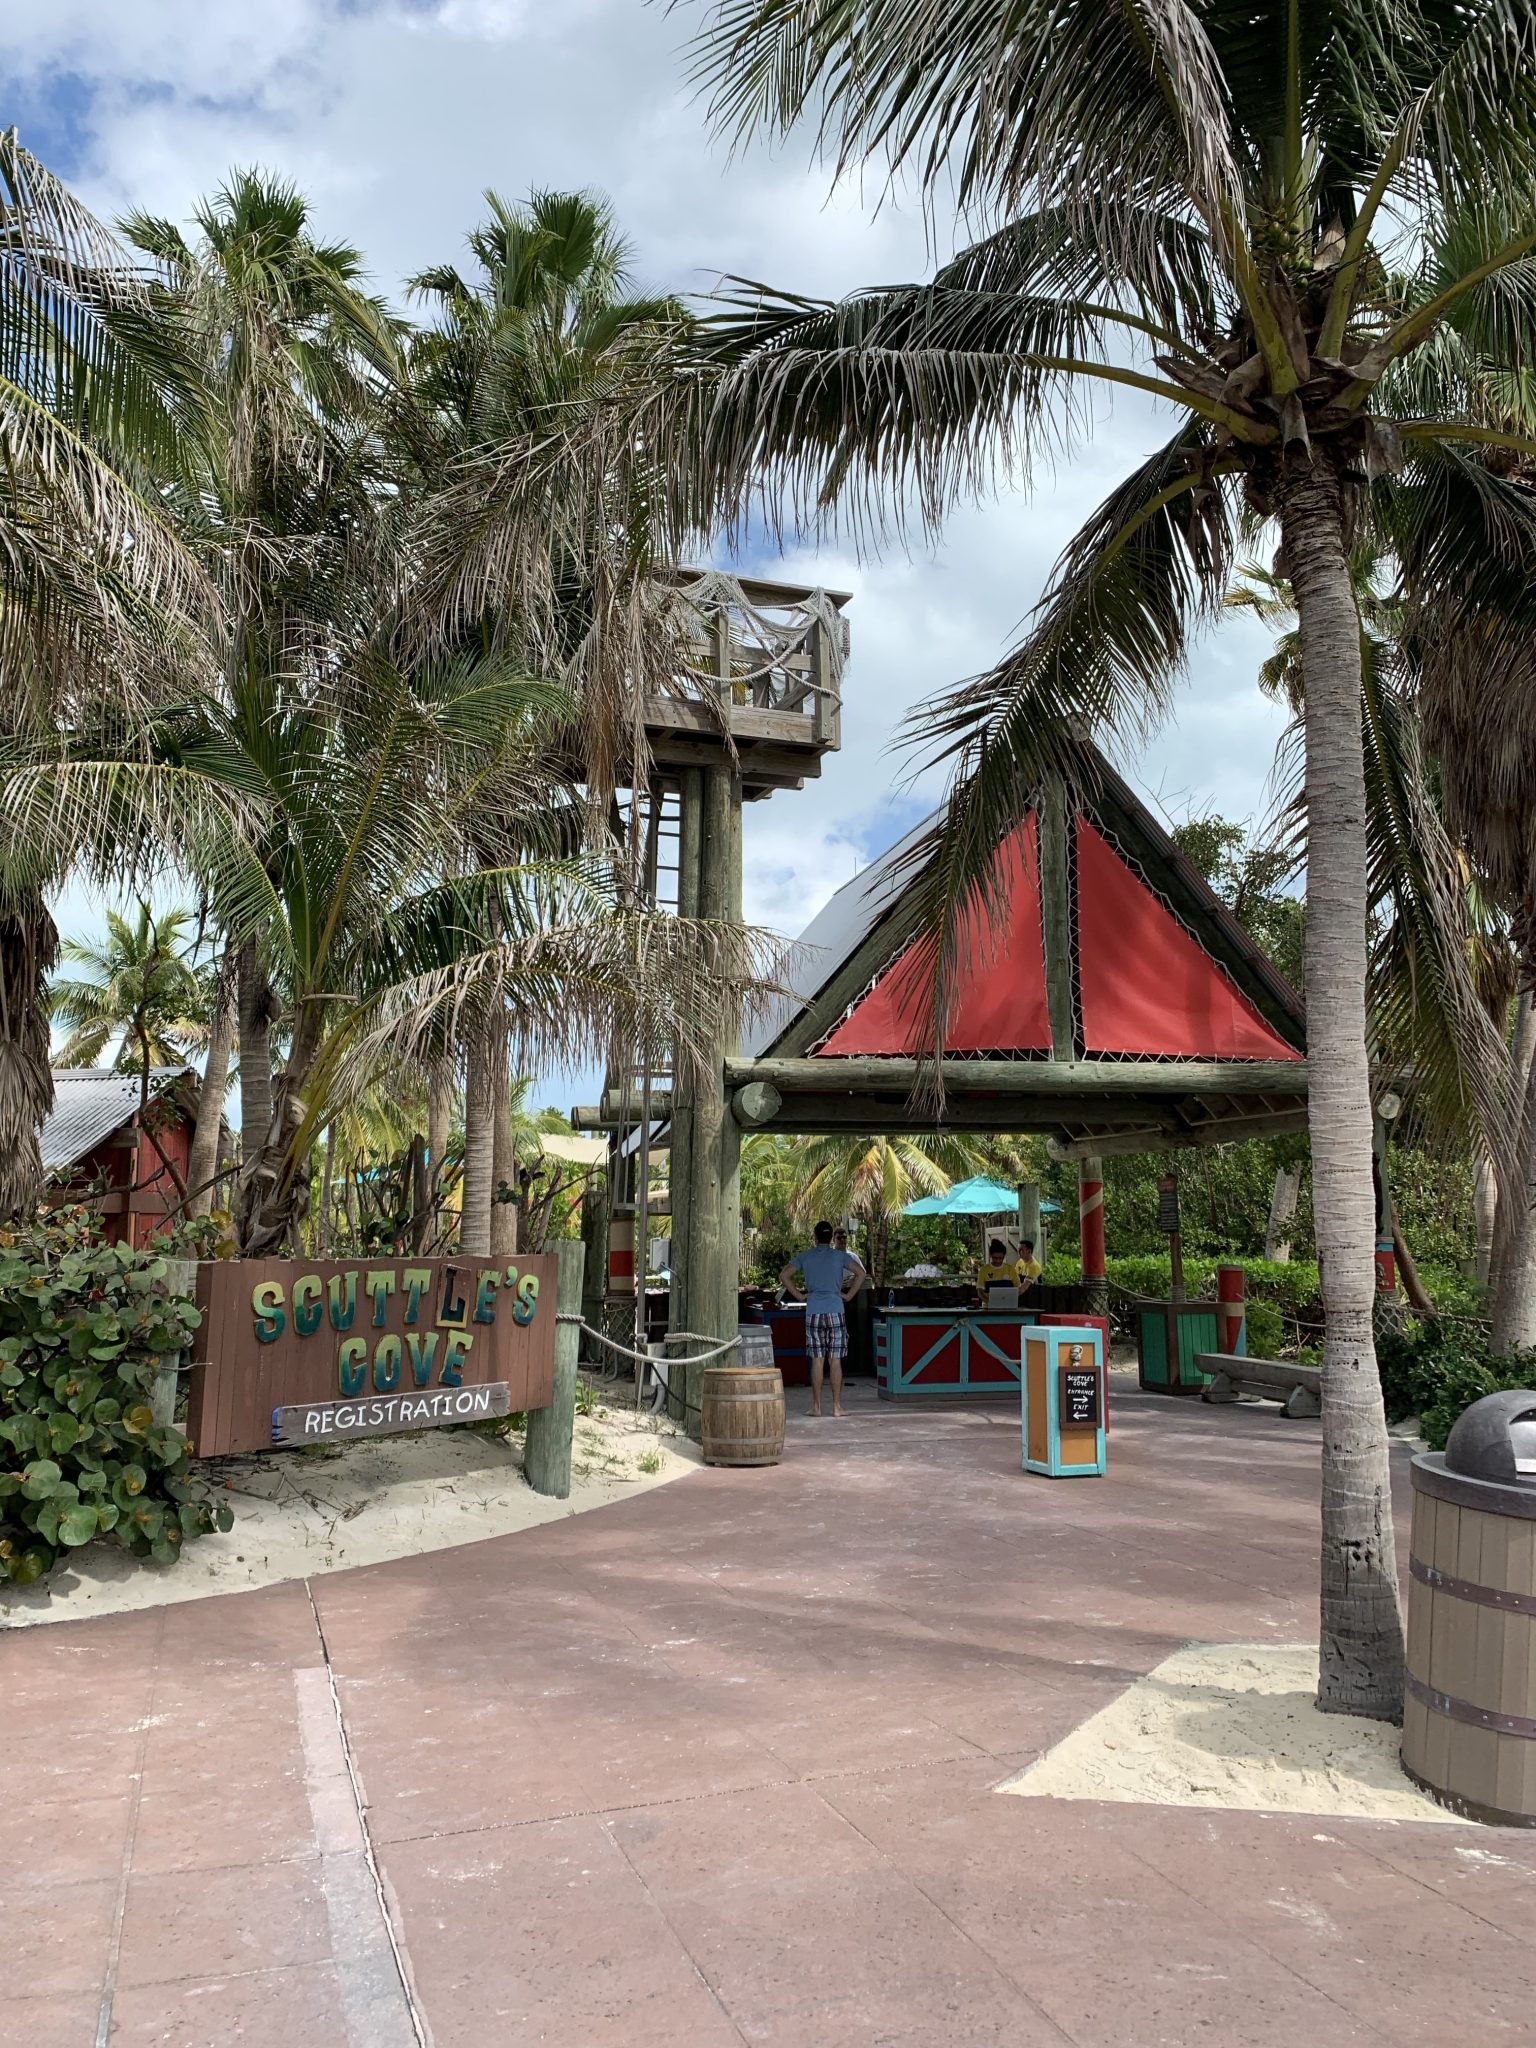 Castaway Cay Activities: a Complete Guide to Beaches and Events featured by top US Disney blogger, Marcie and the Mouse: Scuttle's Cove kids club regstration at Castaway Cay